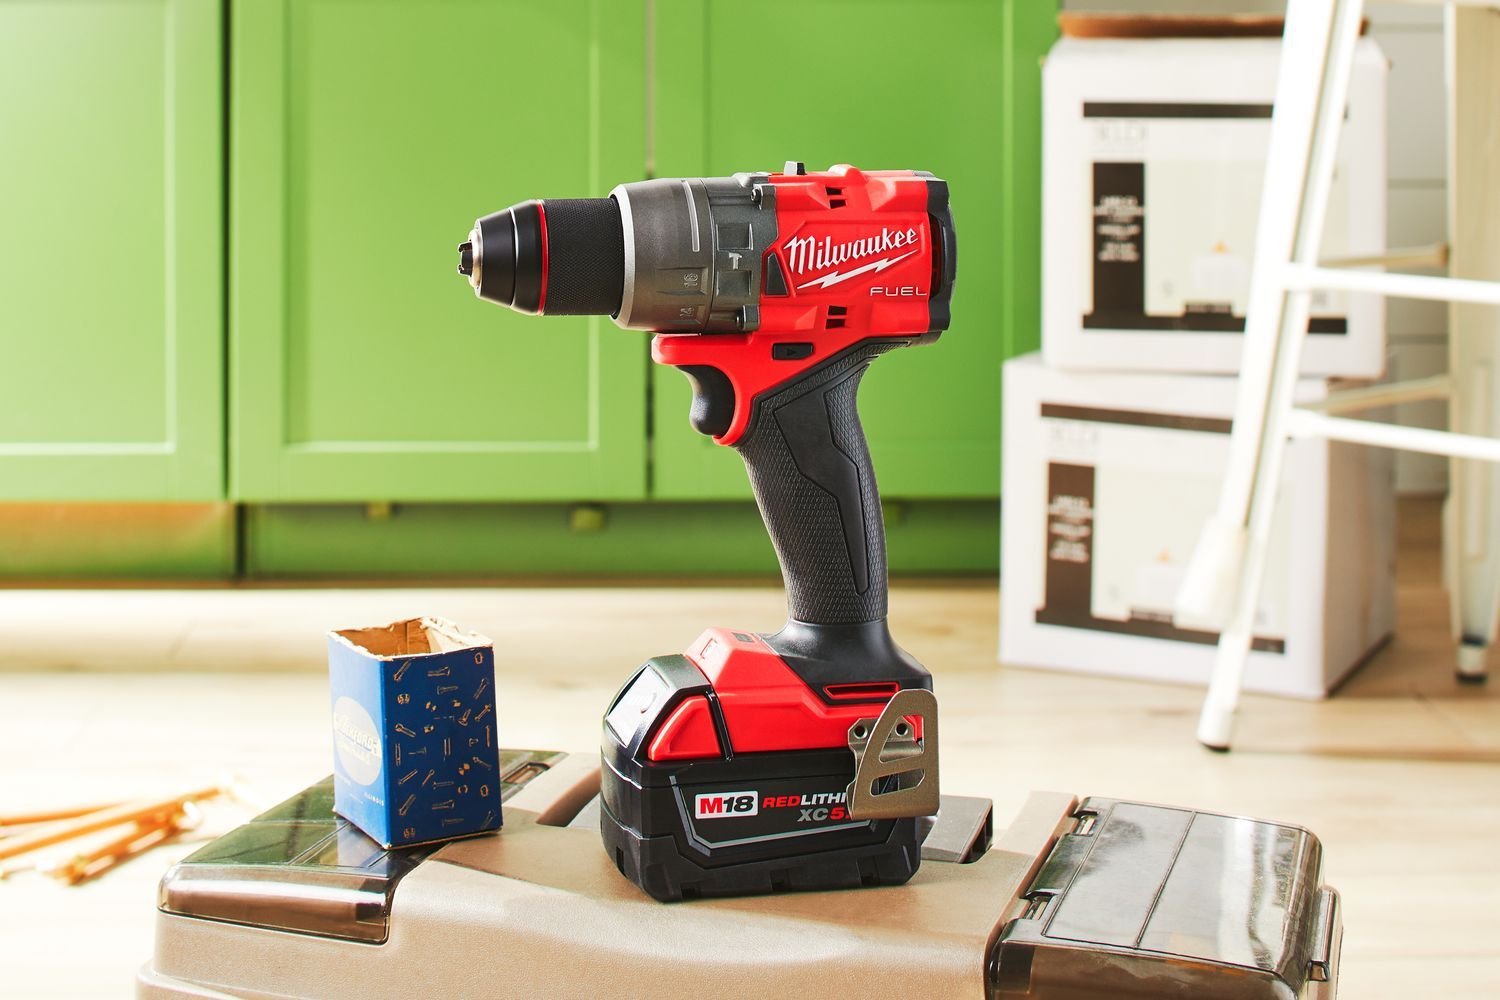 Top Power Drill Suppliers and Manufacturers